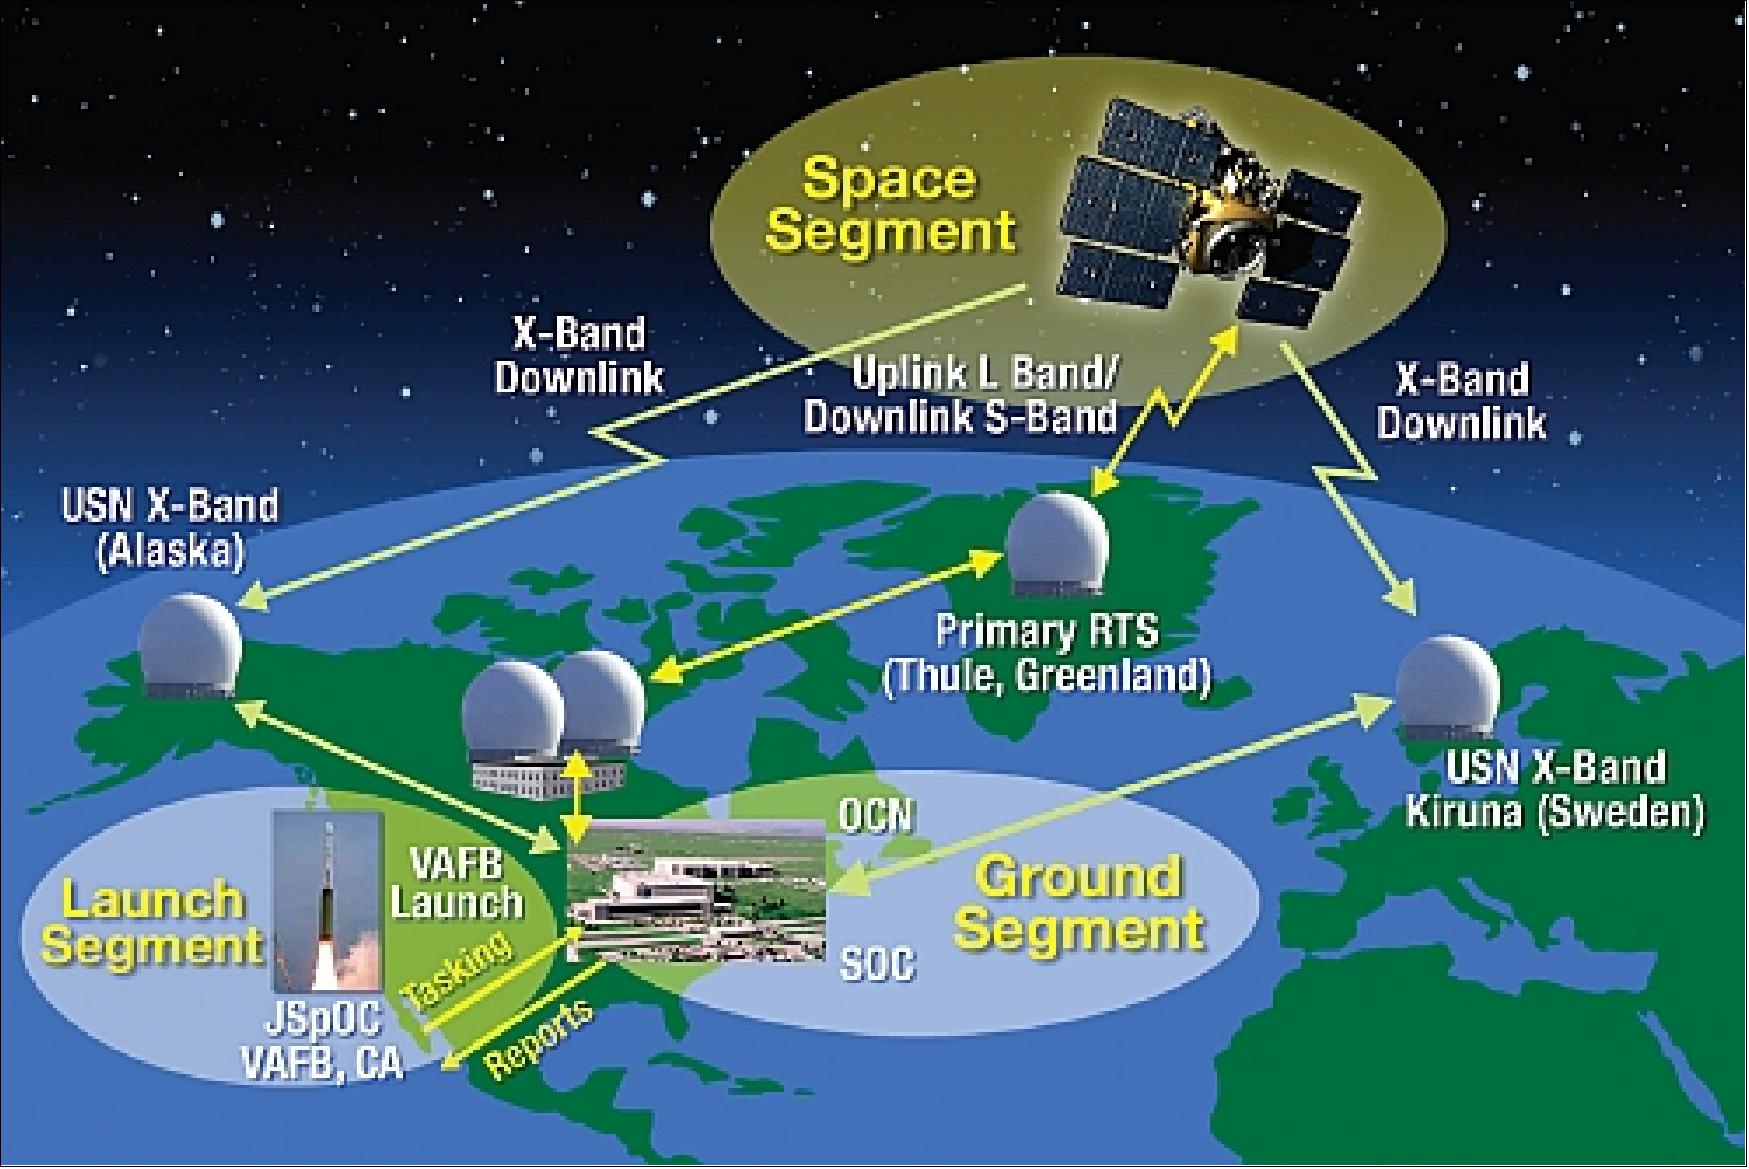 Figure 11: Overview of the SBSS-1 system elements and communication links (image credit: AFSPC)